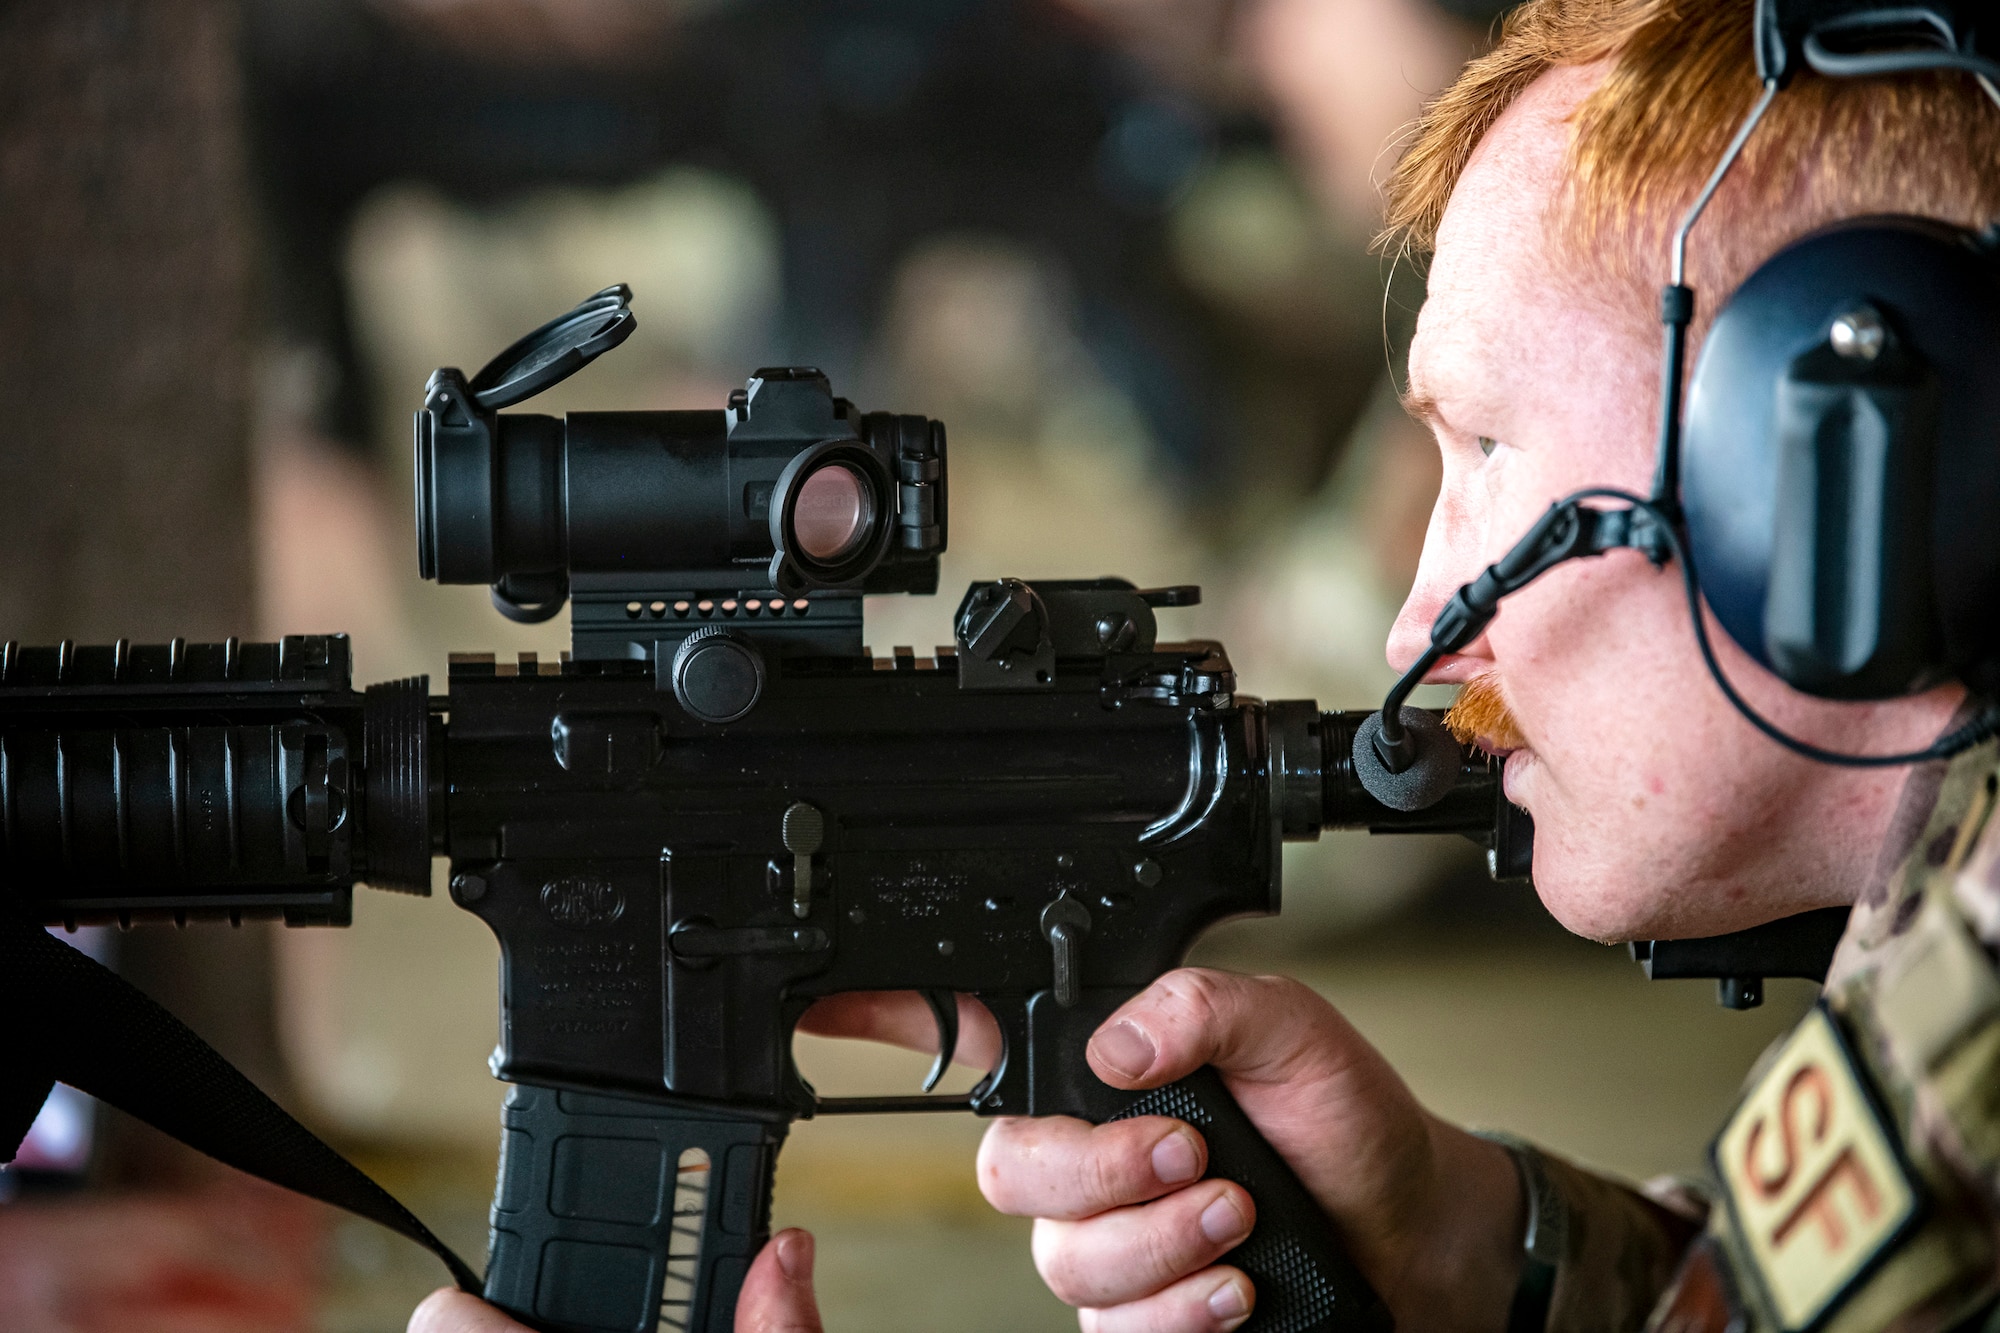 U.S. Air Force Staff Sgt. Michael Frisk, 423d Security Forces Squadron investigator, looks down the sight of an M4 carbine during a proficiency course at RAF Molesworth, England, Aug. 19, 2022. During the course instructors from the 820th Base Defense Group and 435th Contingency Response Group provided oversight and guidance to help critique and advance the combat arms skills of the defenders from the 423d SFS. (U.S. Air Force photo by Staff Sgt. Eugene Oliver)